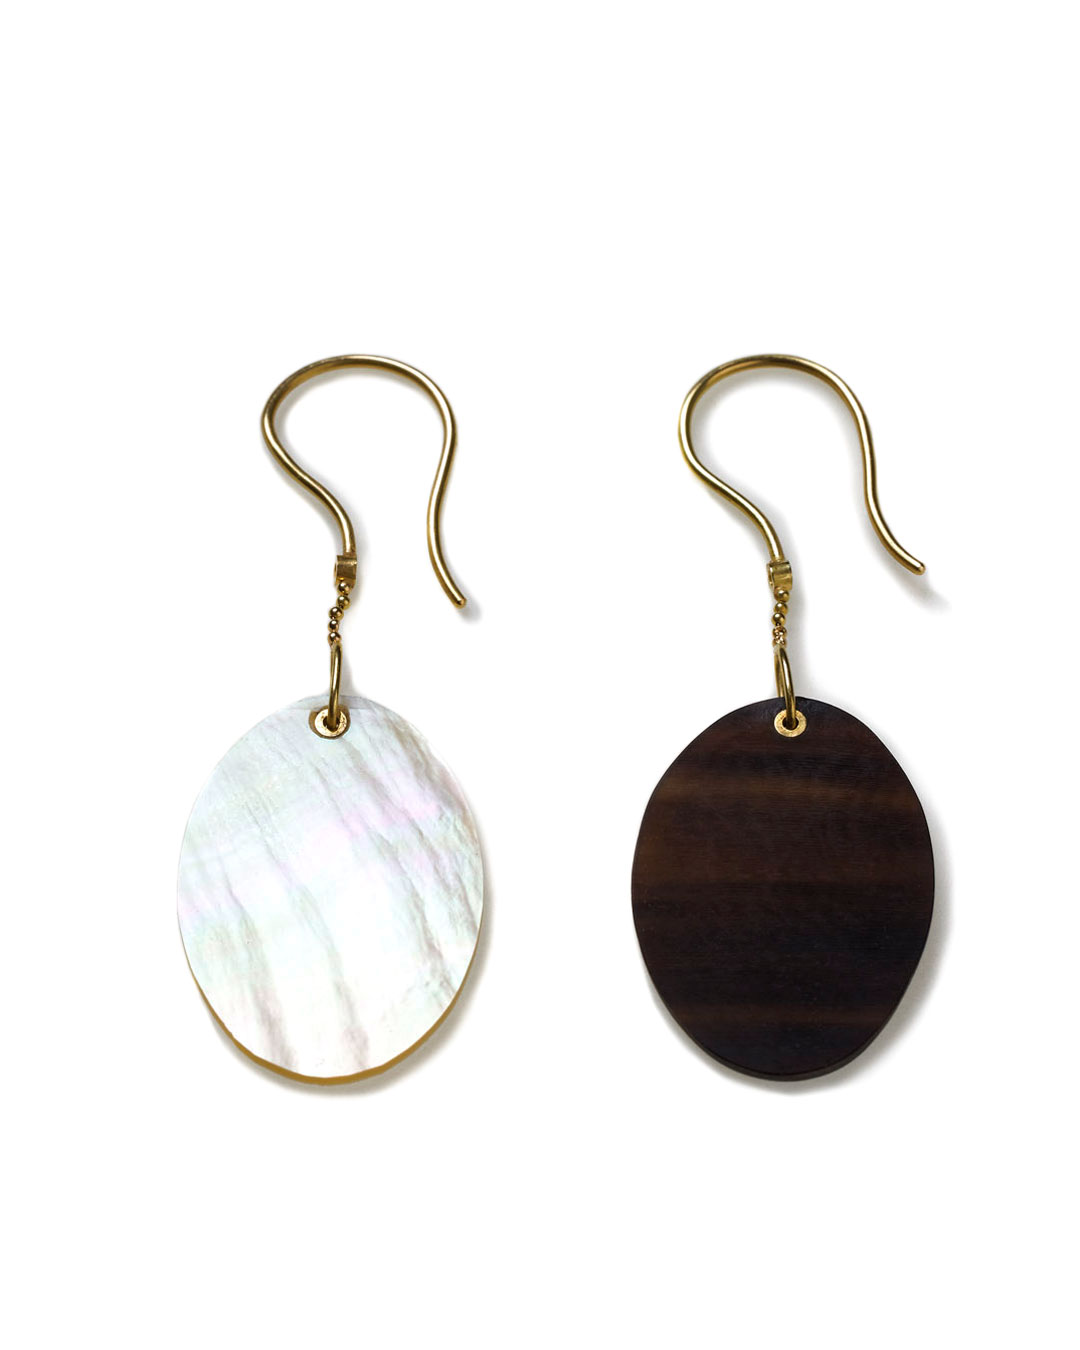 Julie Mollenhauer, untitled, 2016, earrings; mother-of-pearl, buffalo horn, 18ct gold, 20 x 15 x 2 mm, €710